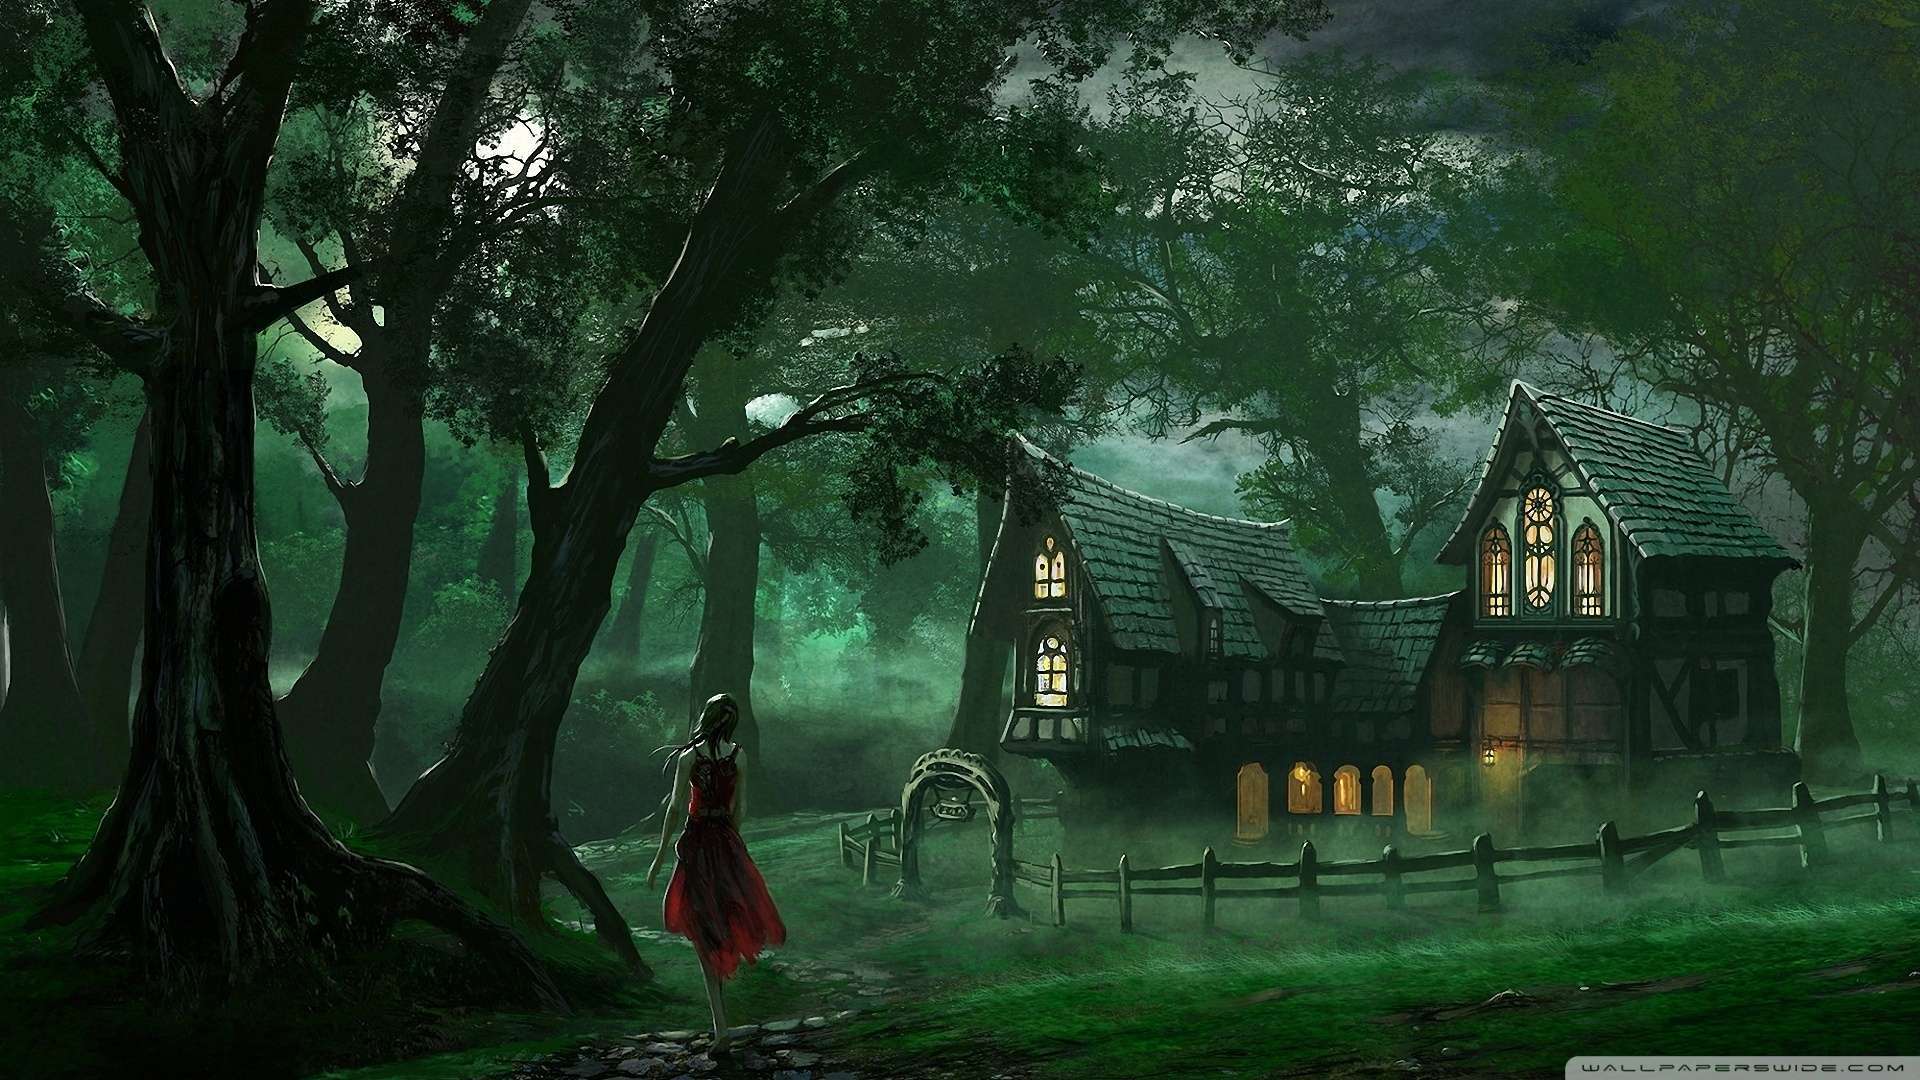 Wallpaper The Forest House 1080p HD Upload At December